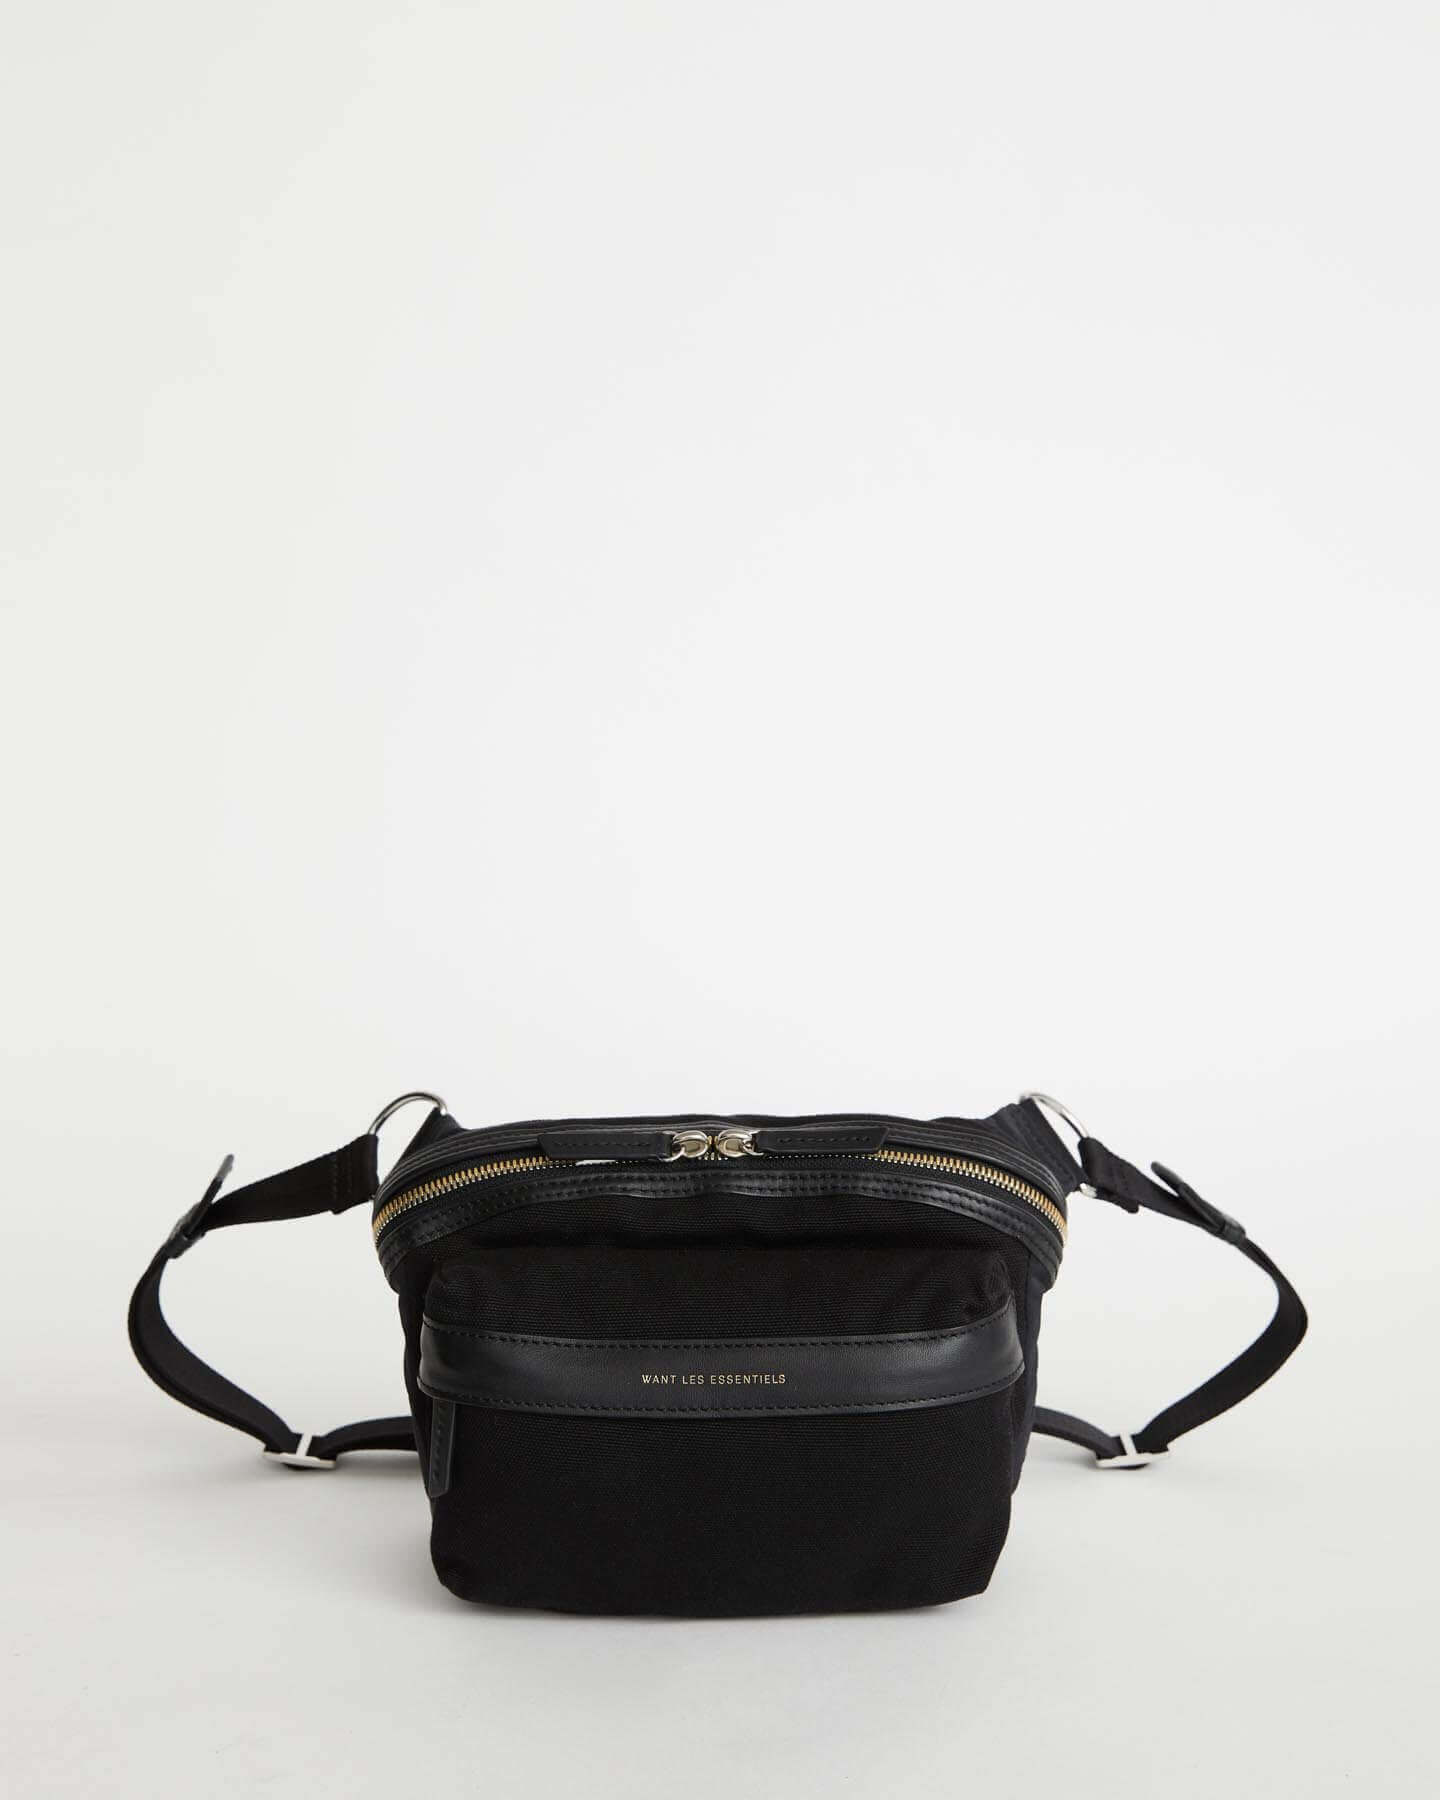 The New Essentials Have Arrived | WANT Les Essentiels